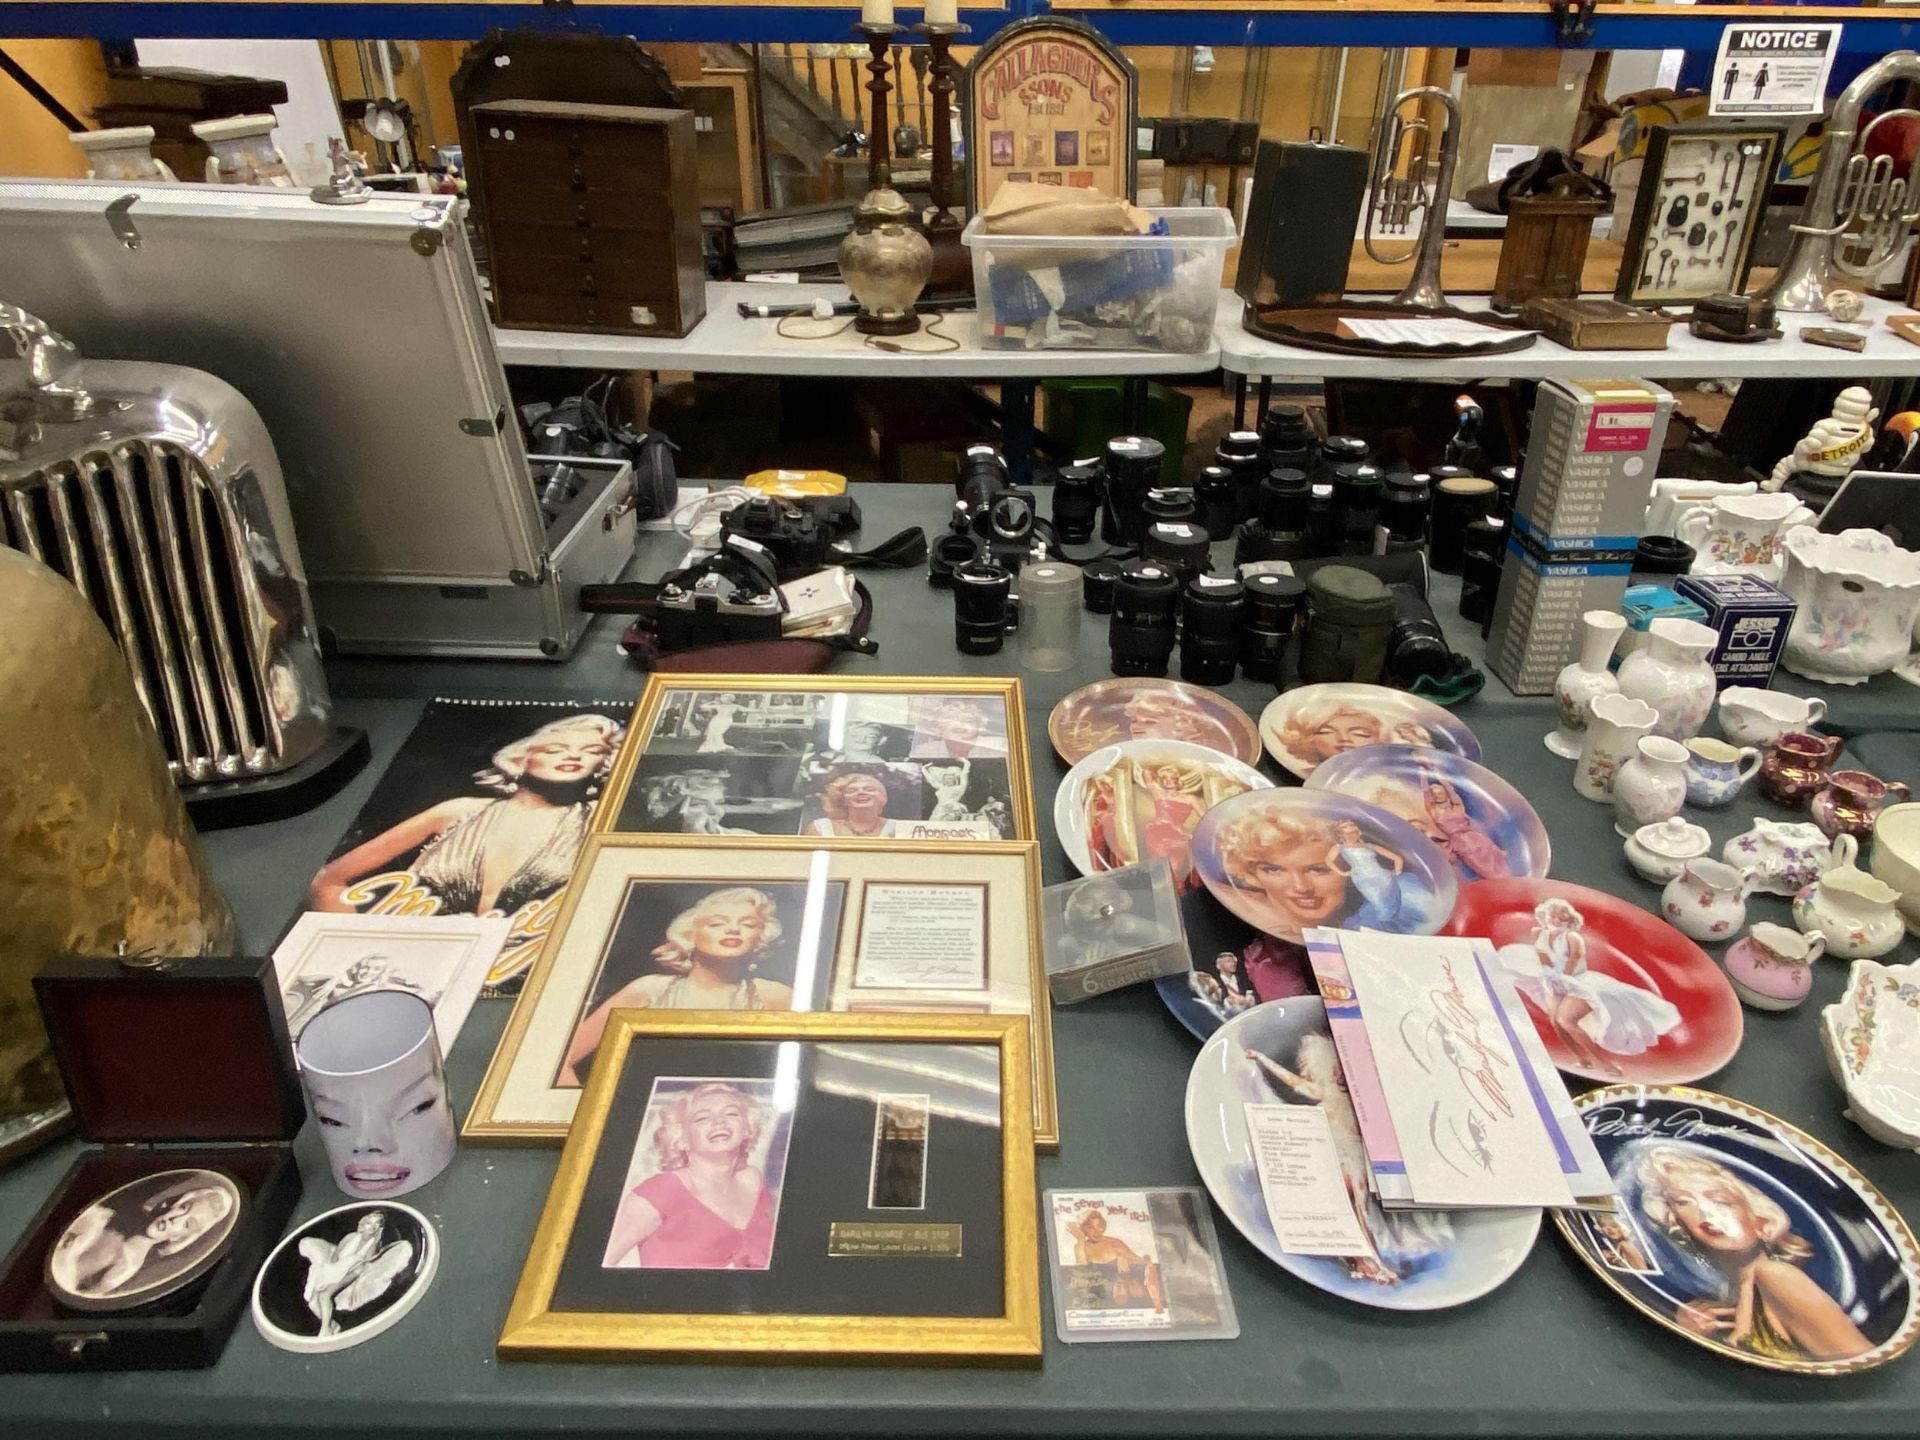 A LARGE COLLECTION OF MARILYN MONROE MEMORABILIA TO INCLUDE A FRAMED FILM CELL AND FRAMED PHOTO WITH